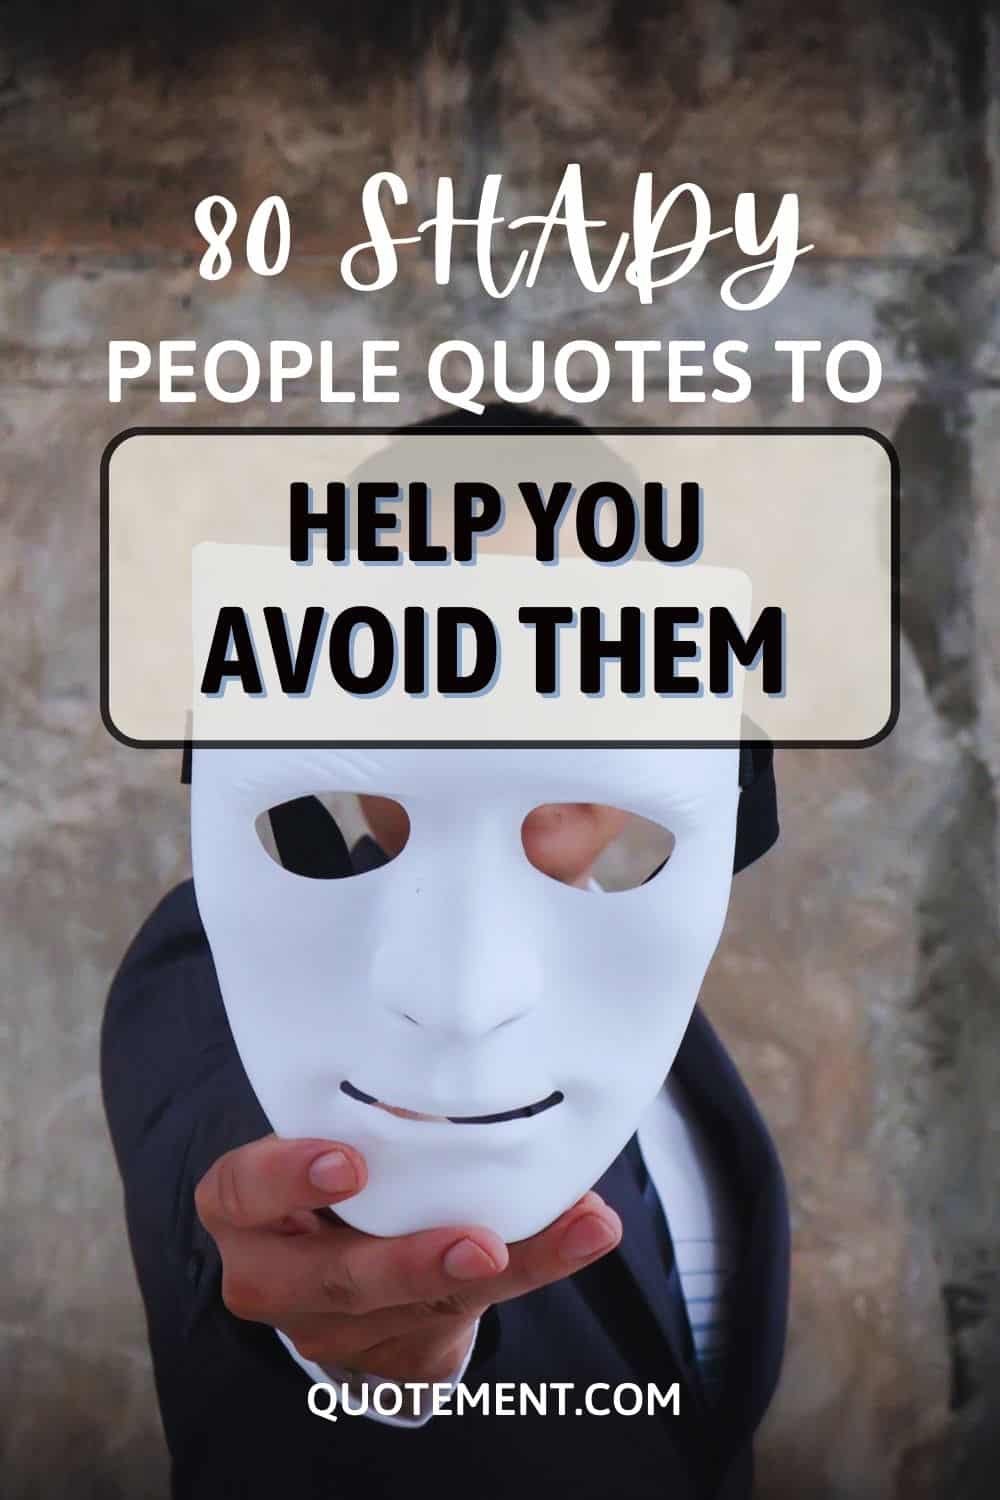 80 Clever Shady People Quotes To Help You Cut Them Off